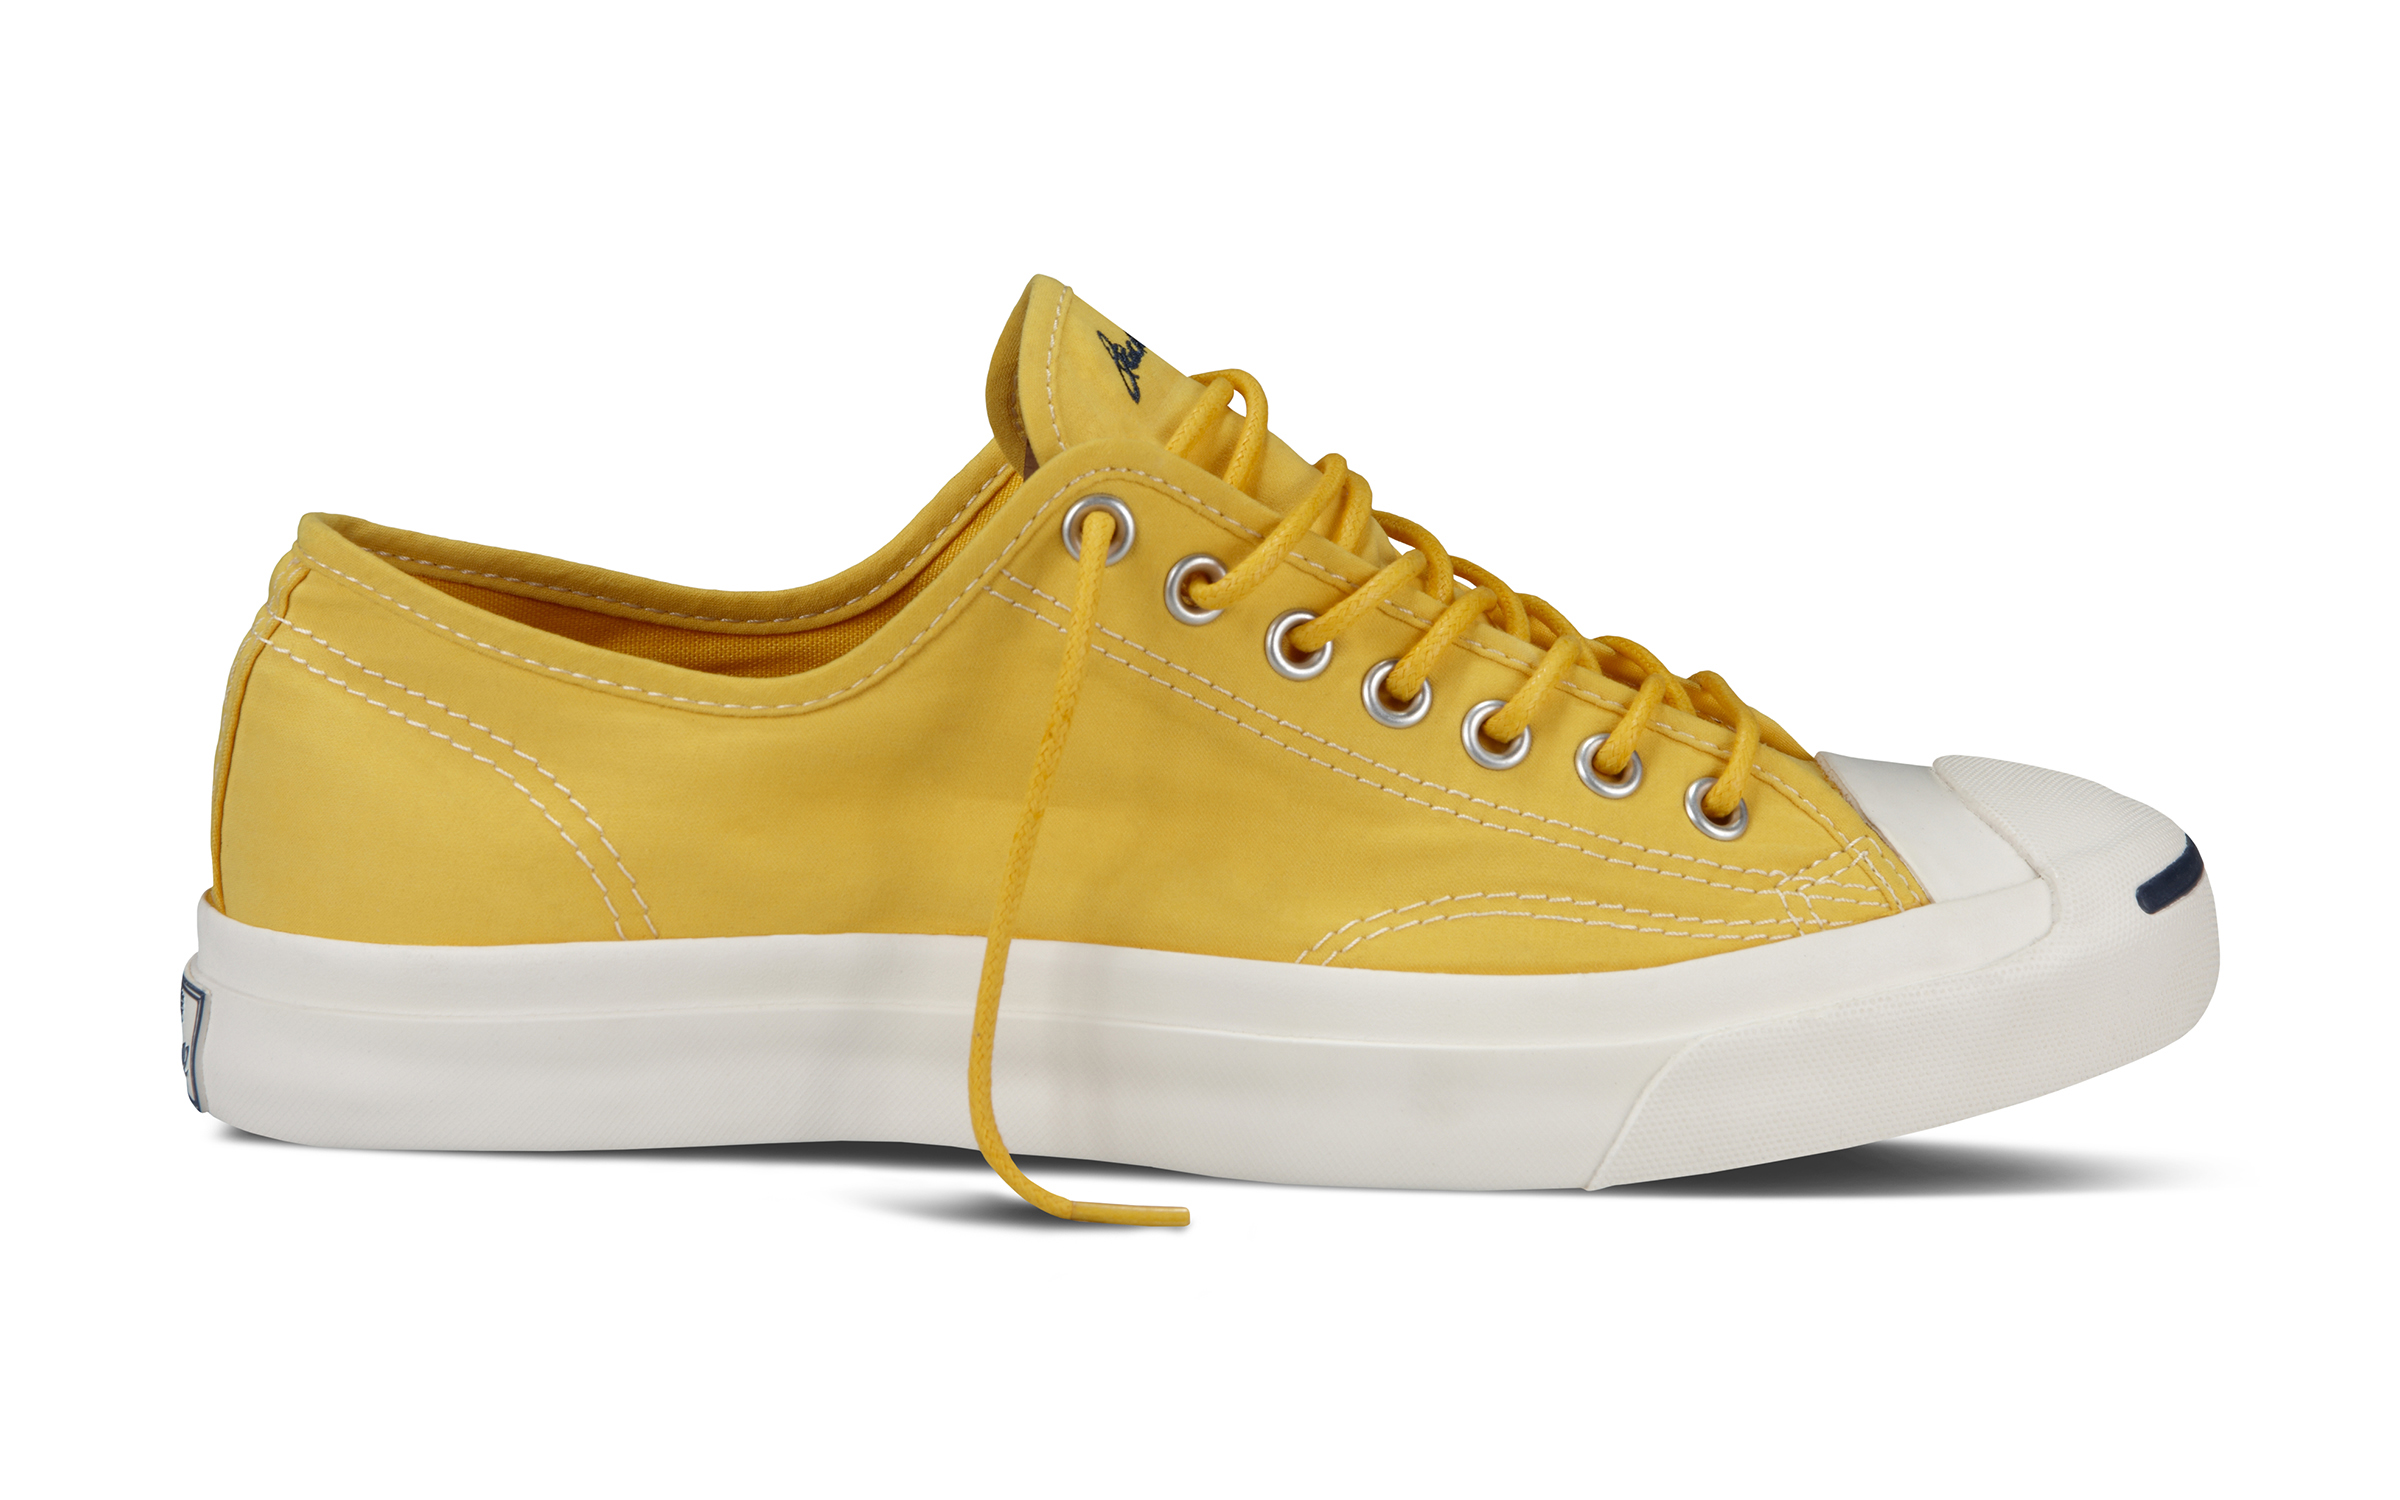 Converse Fall 2014 Jack Purcell 03